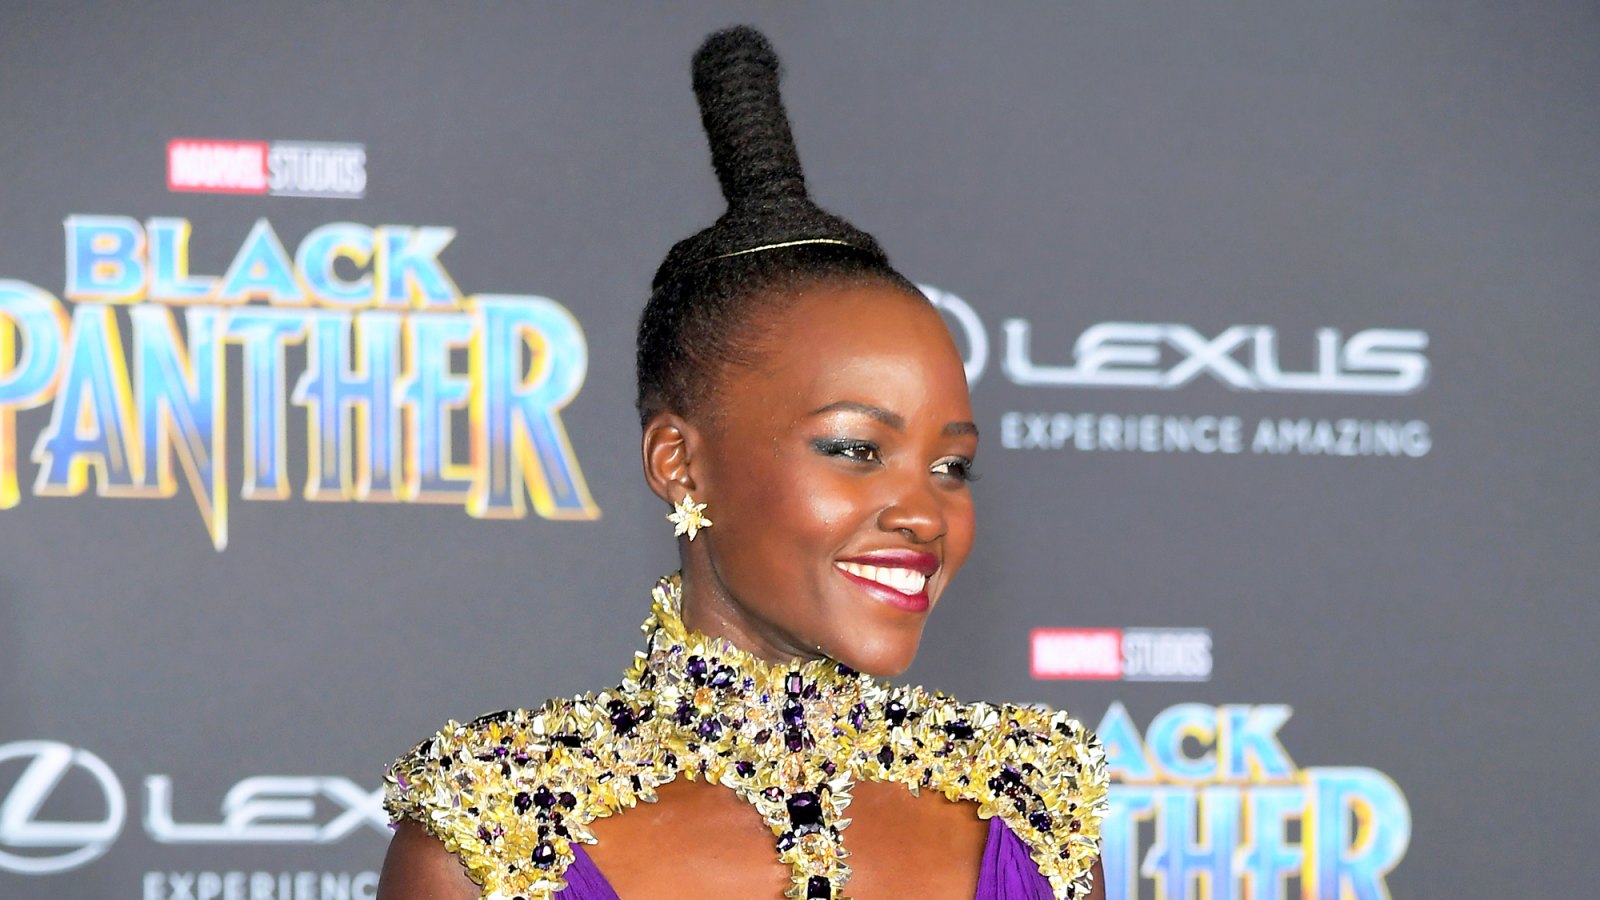 Lupita Nyong'o arrives for the World Premiere of Marvel Studios? Black Panther, presented by Lexus, at Dolby Theatre in Hollywood on January 29, 2018.